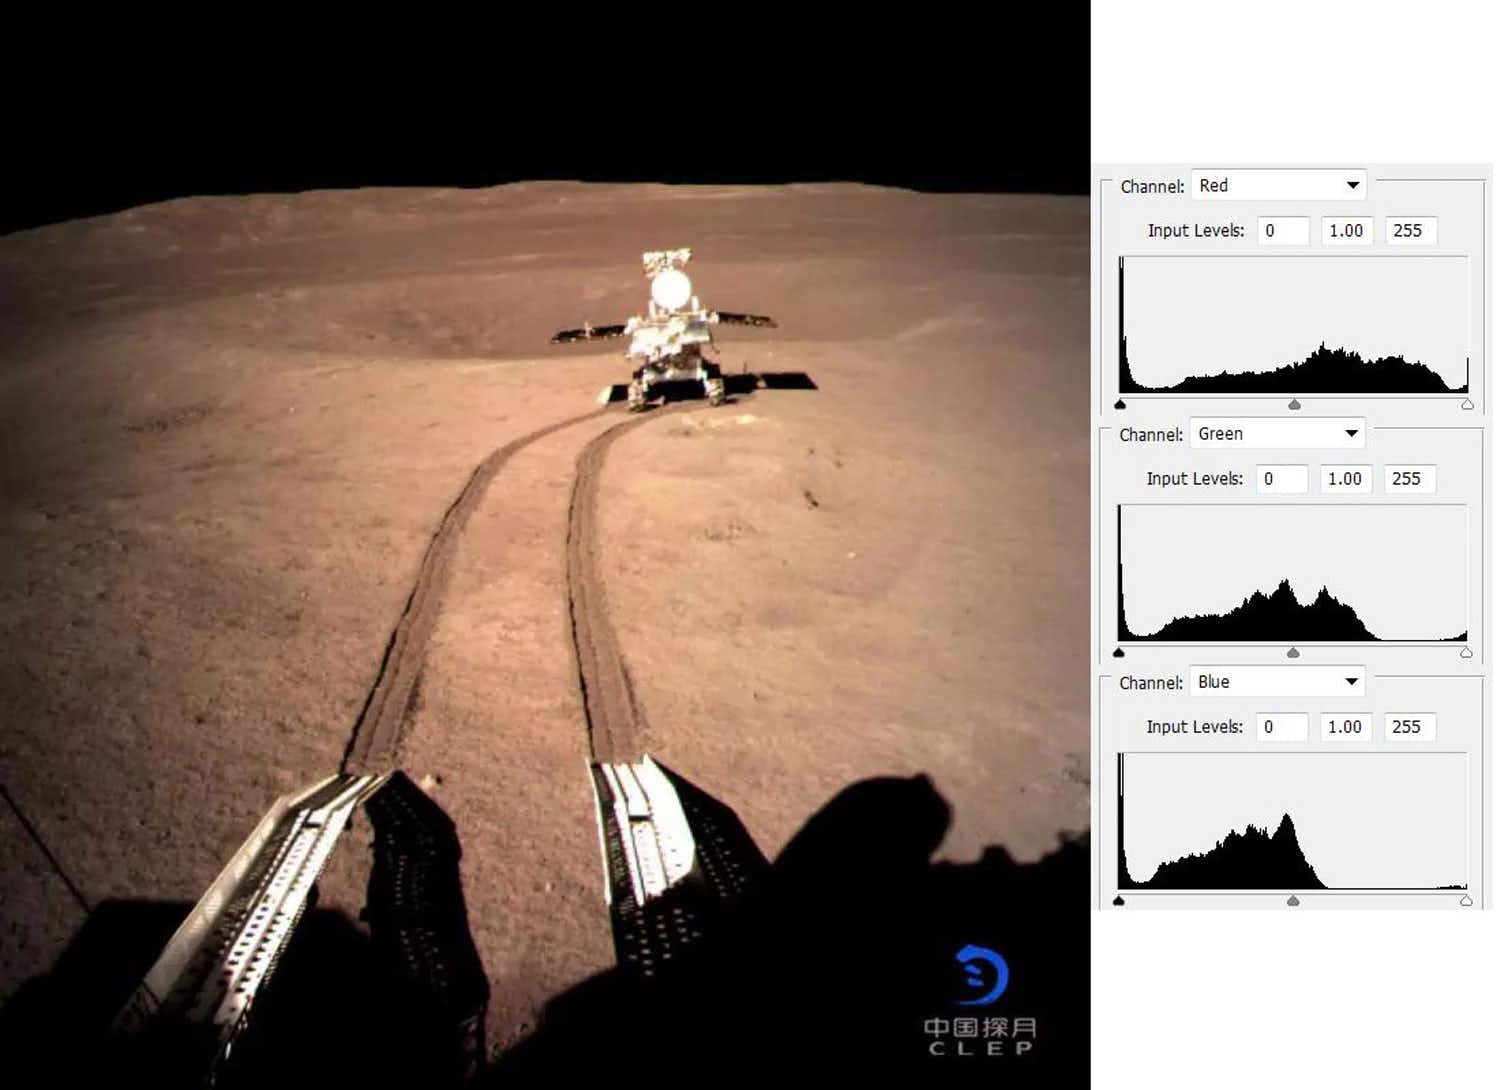 Raw Change'4 image, showing the Yutu 2 rover. Histograms of the red, green and blue channels are shown on the right. Image Credit: CNSA/HANDOUT/EPA